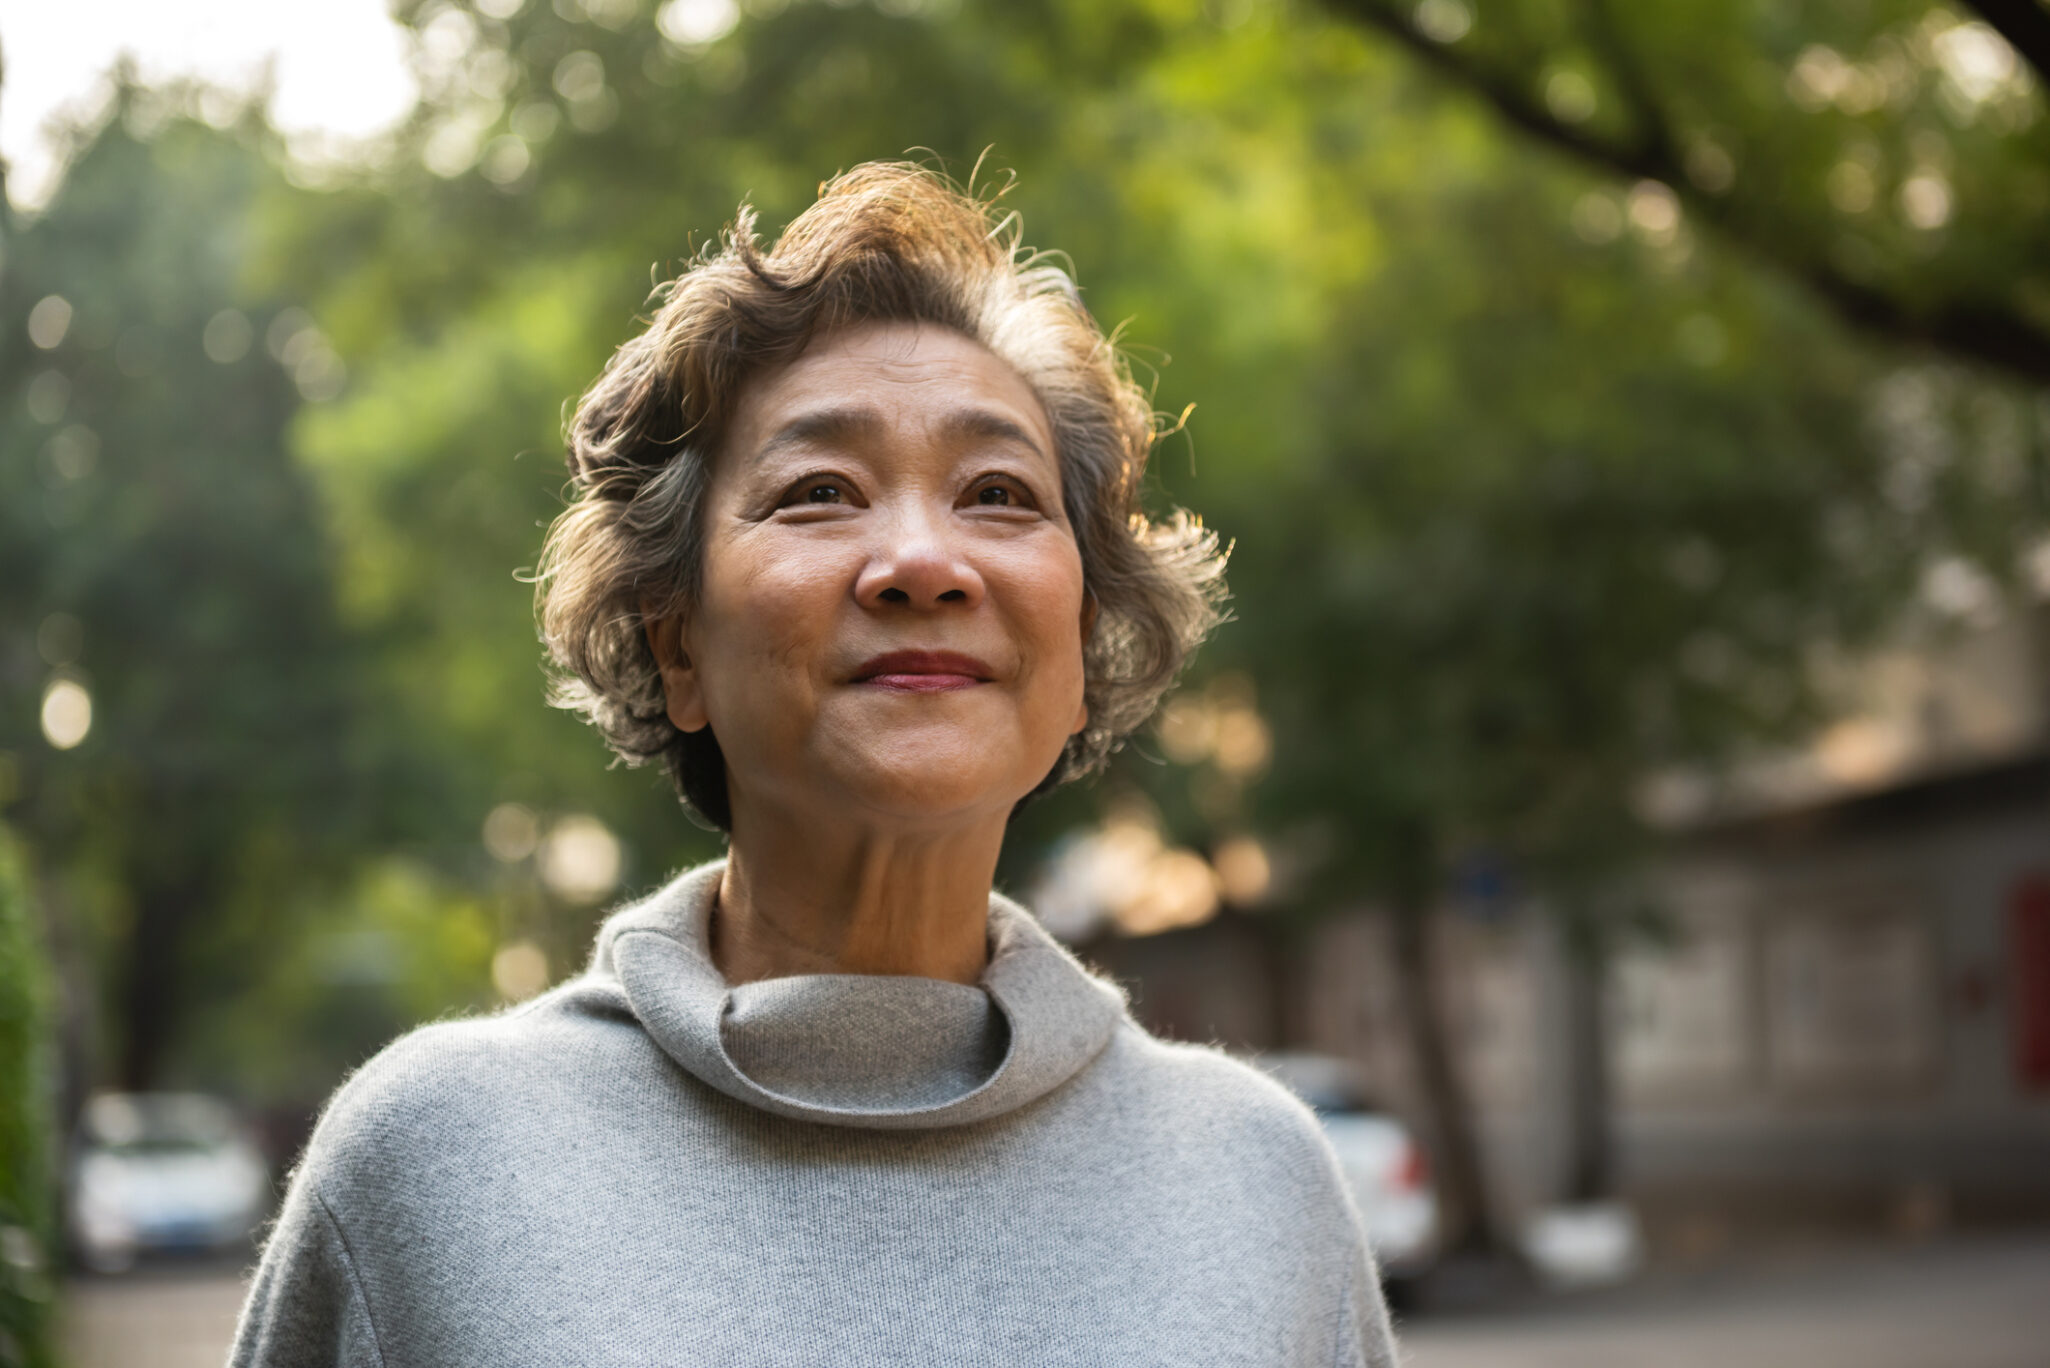 A smiling older woman outside